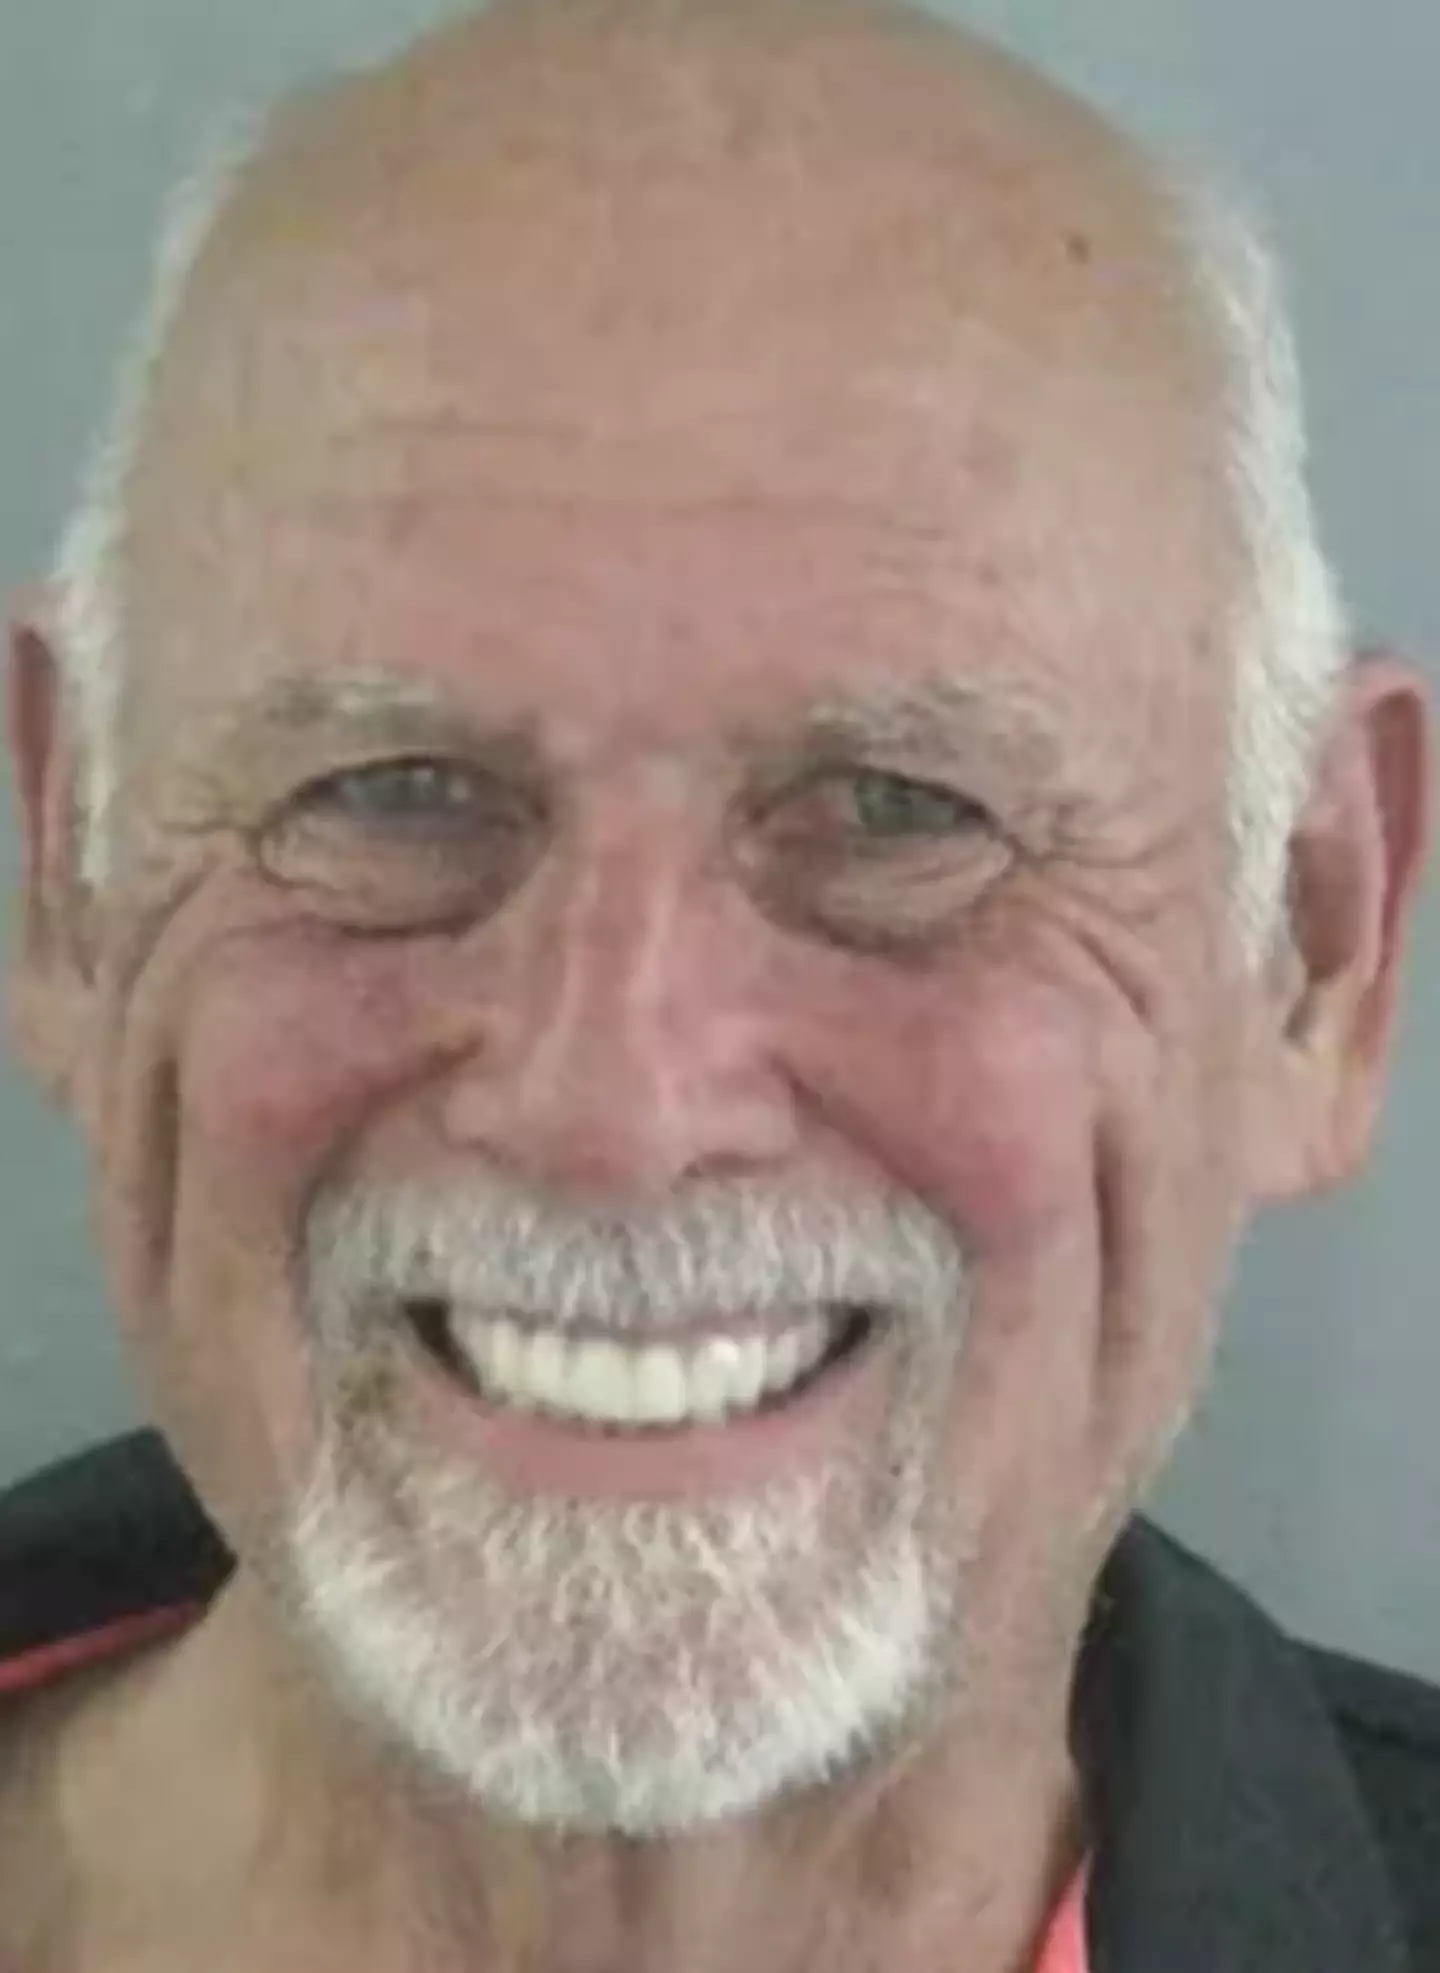 The 77-year-old was allegedly found with the drugs in 2018.